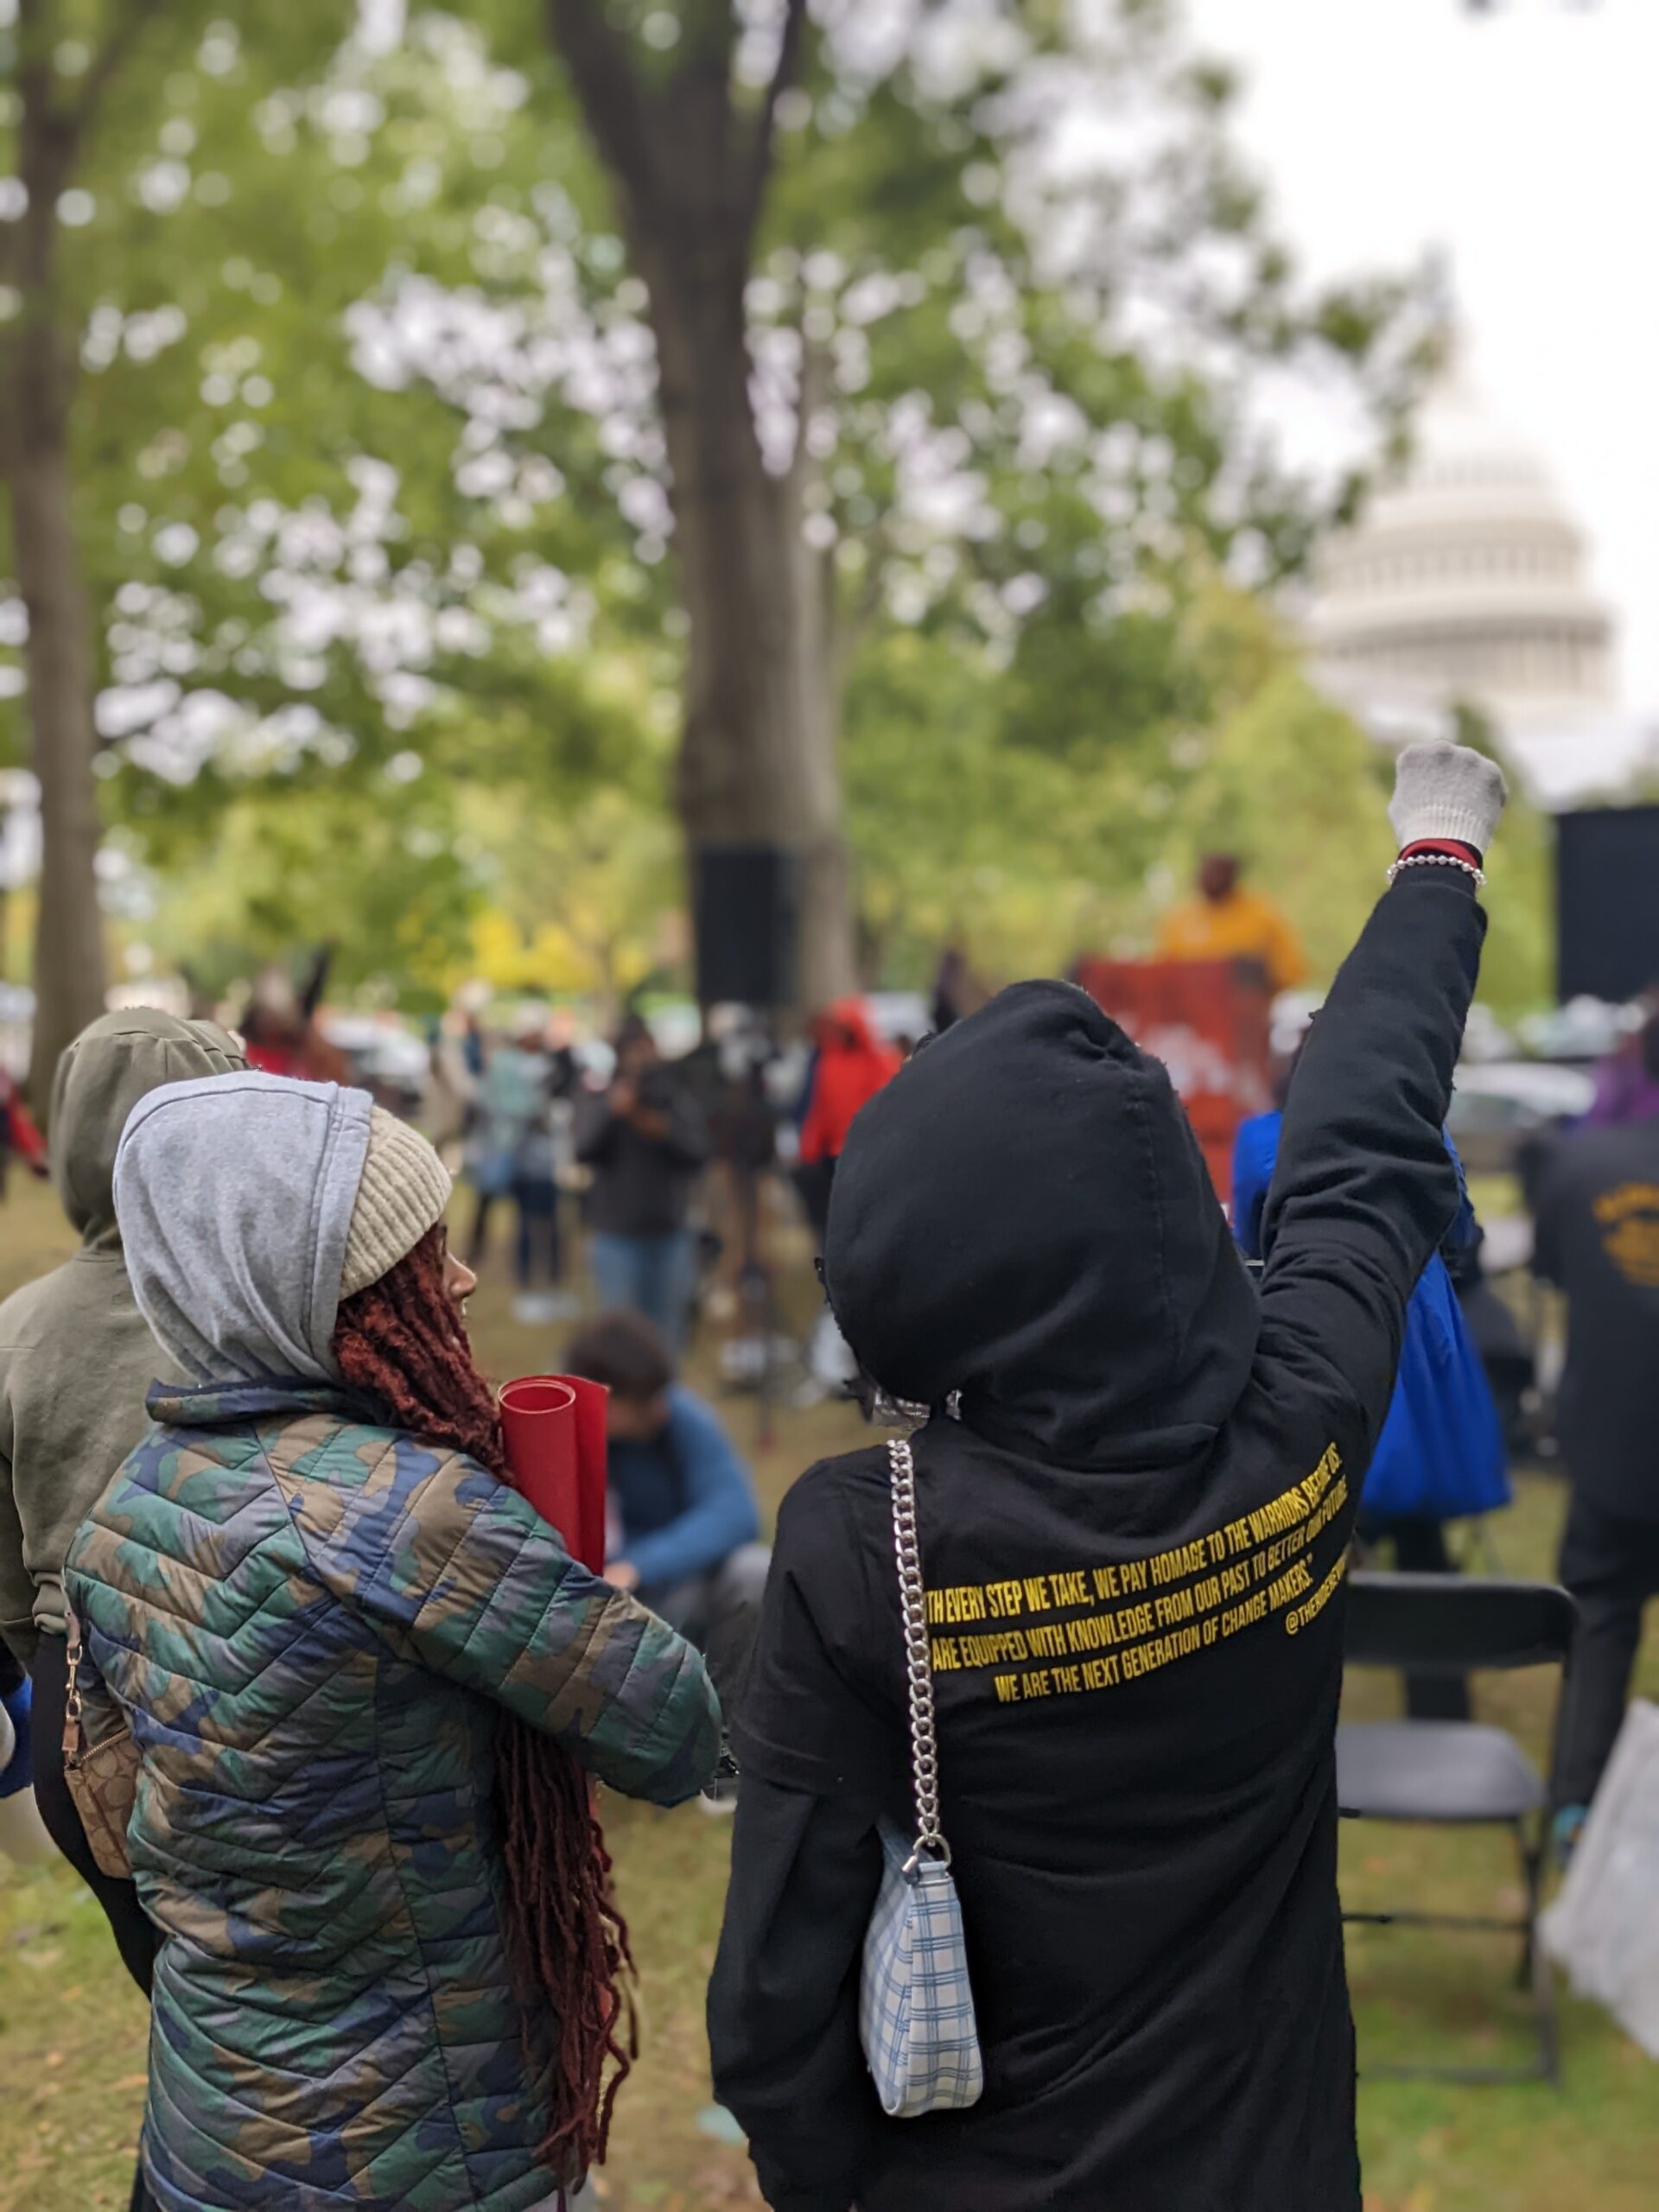 Two protestors standing facing the United States Capital, one with their raised fist in the air.